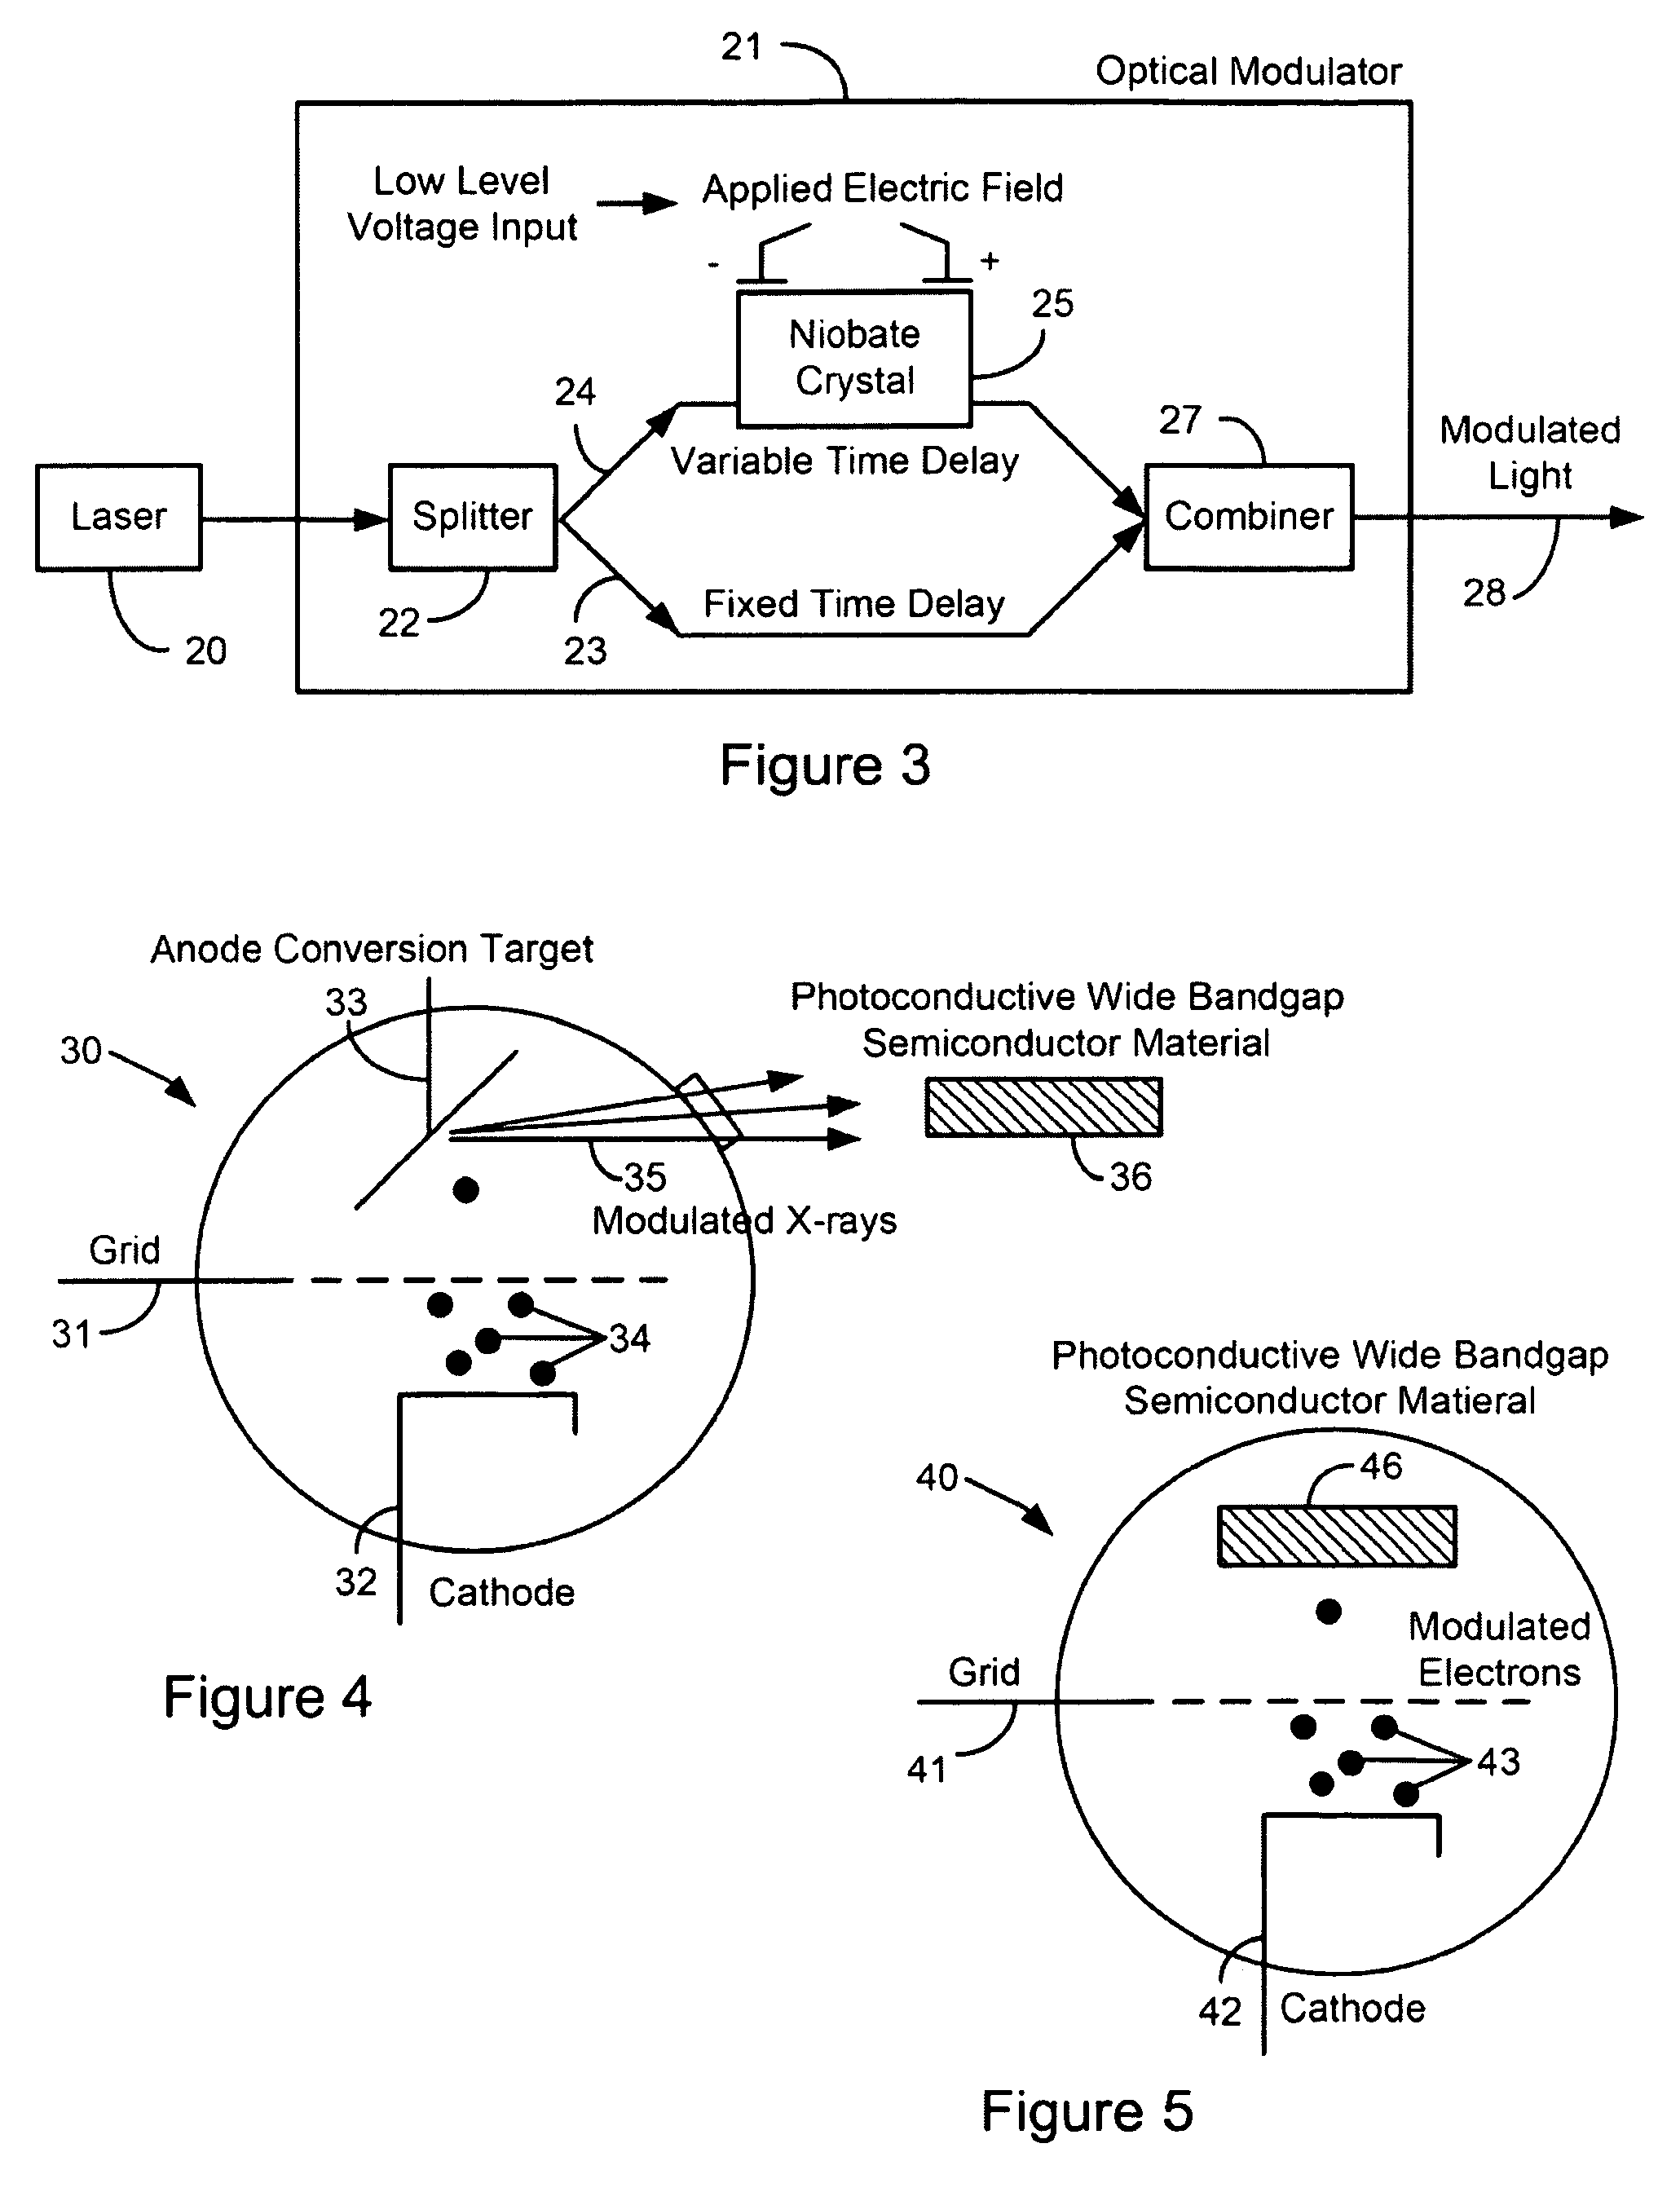 System and method of modulating electrical signals using photoconductive wide bandgap semiconductors as variable resistors